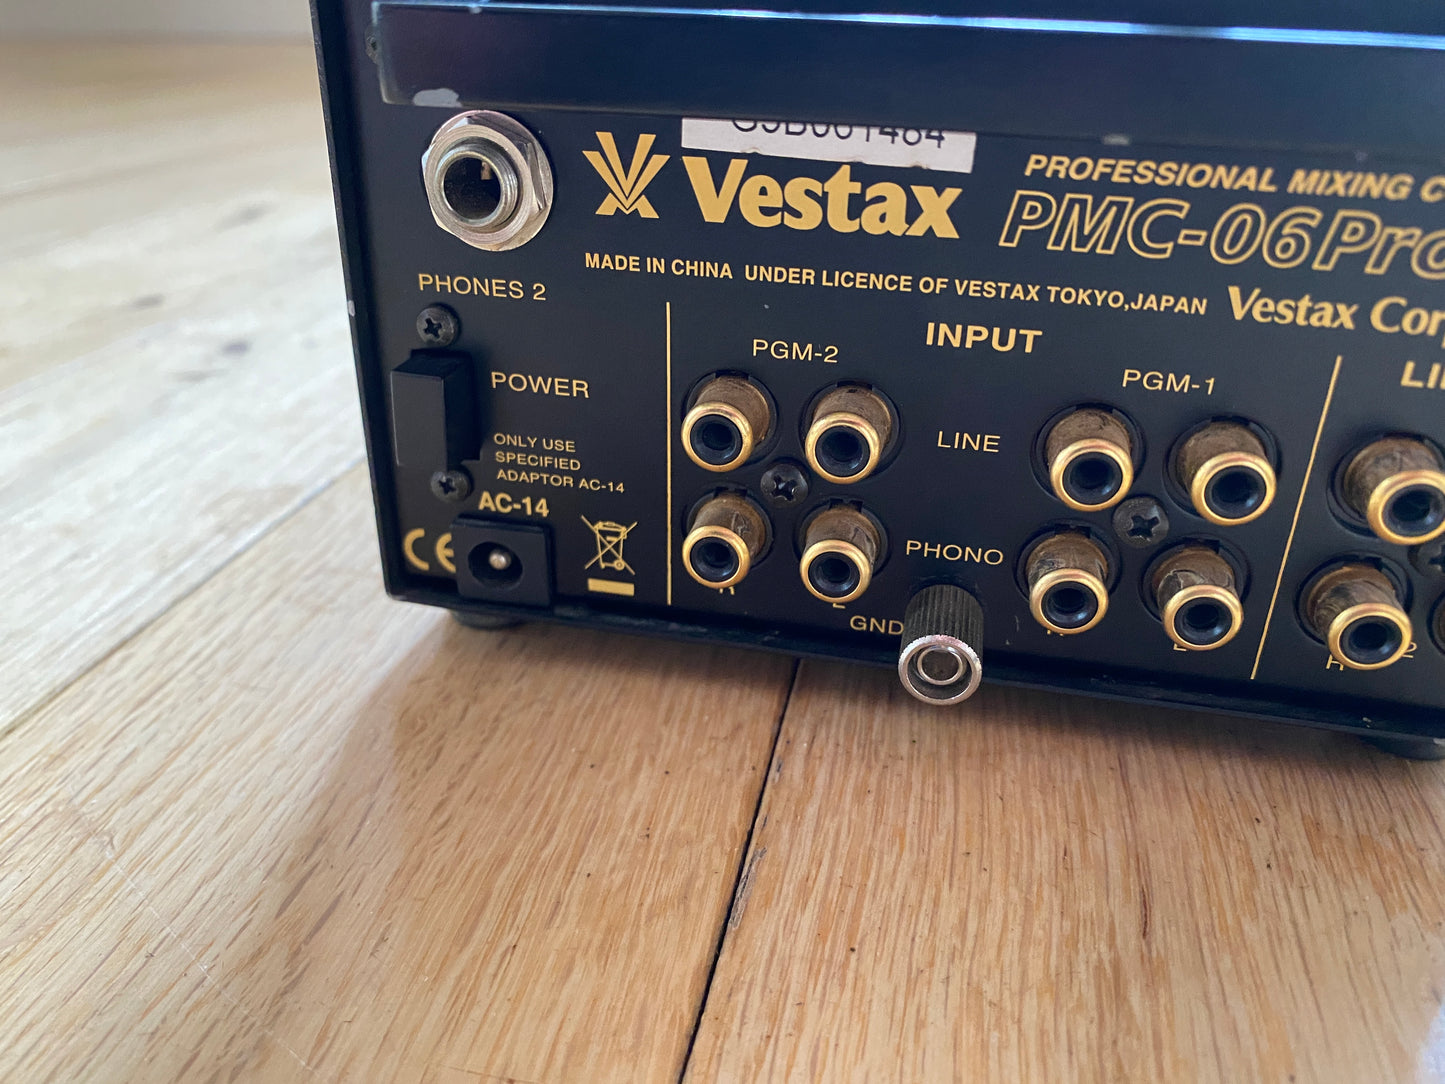 Vestax PMC-06 Pro VCA Serviced Mixer With ISP Faceplate